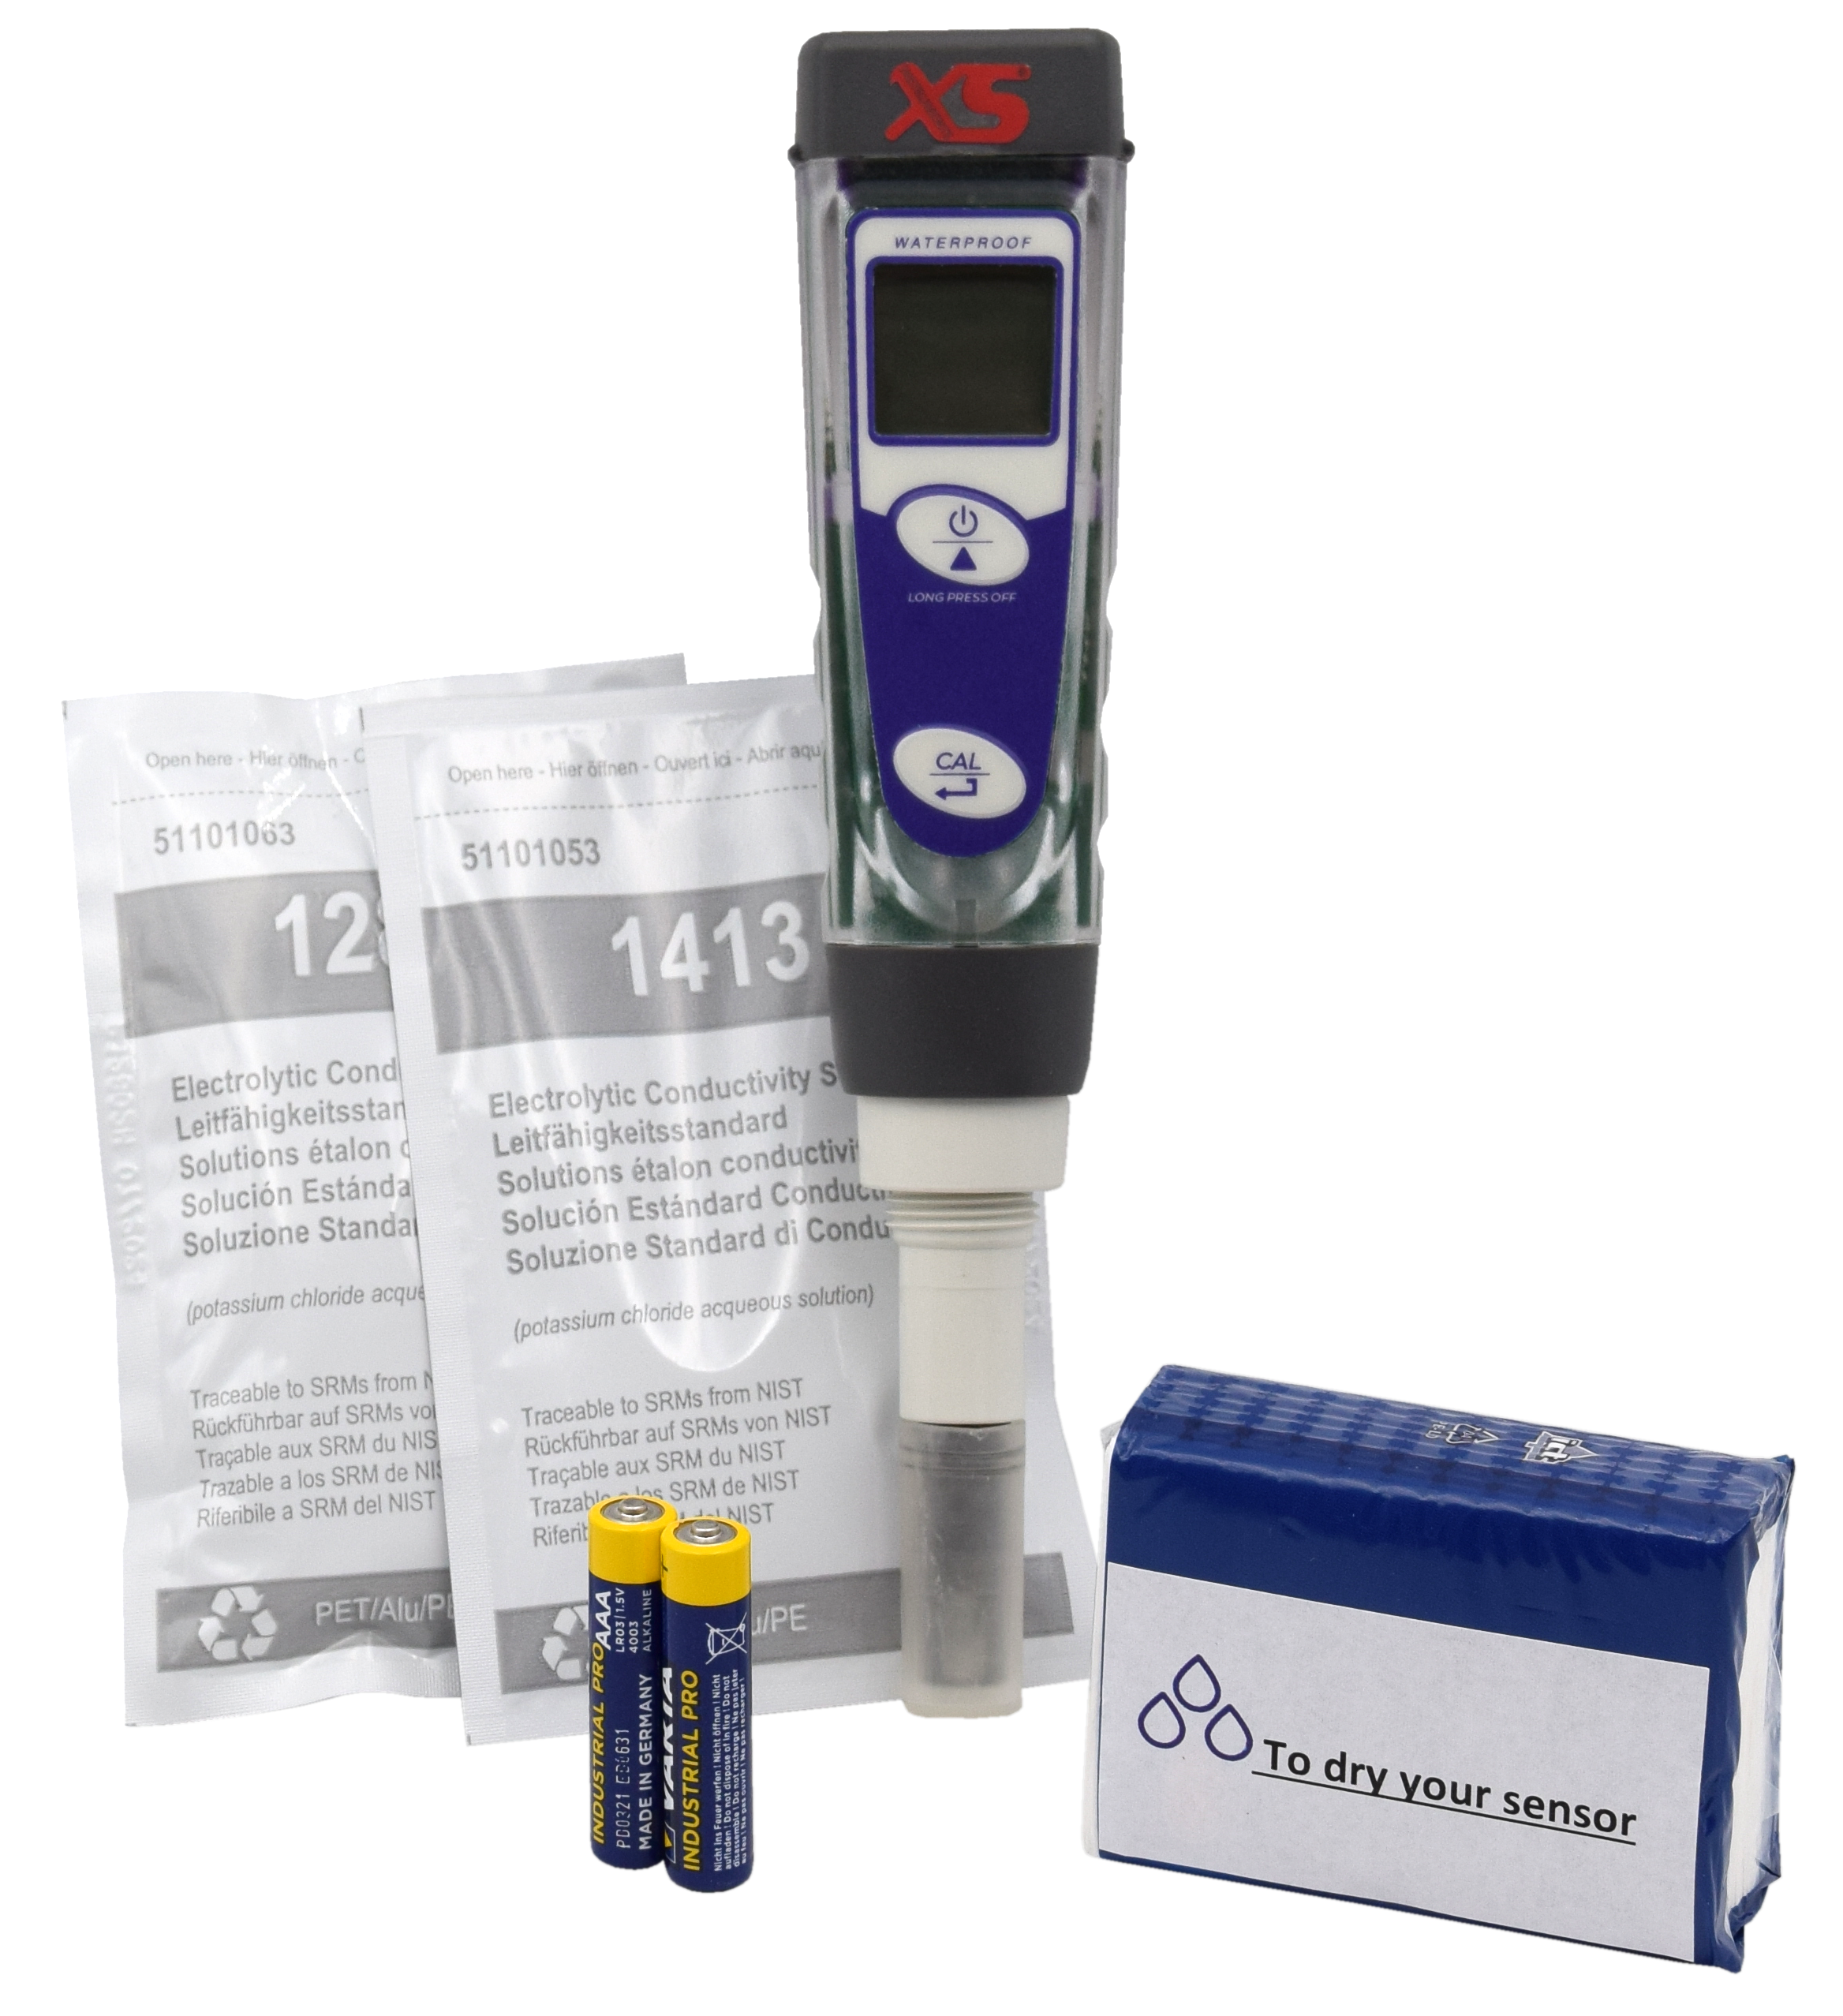 XS COND 1 Tester Kit – Measuring instrument for determining the electric conductivity value